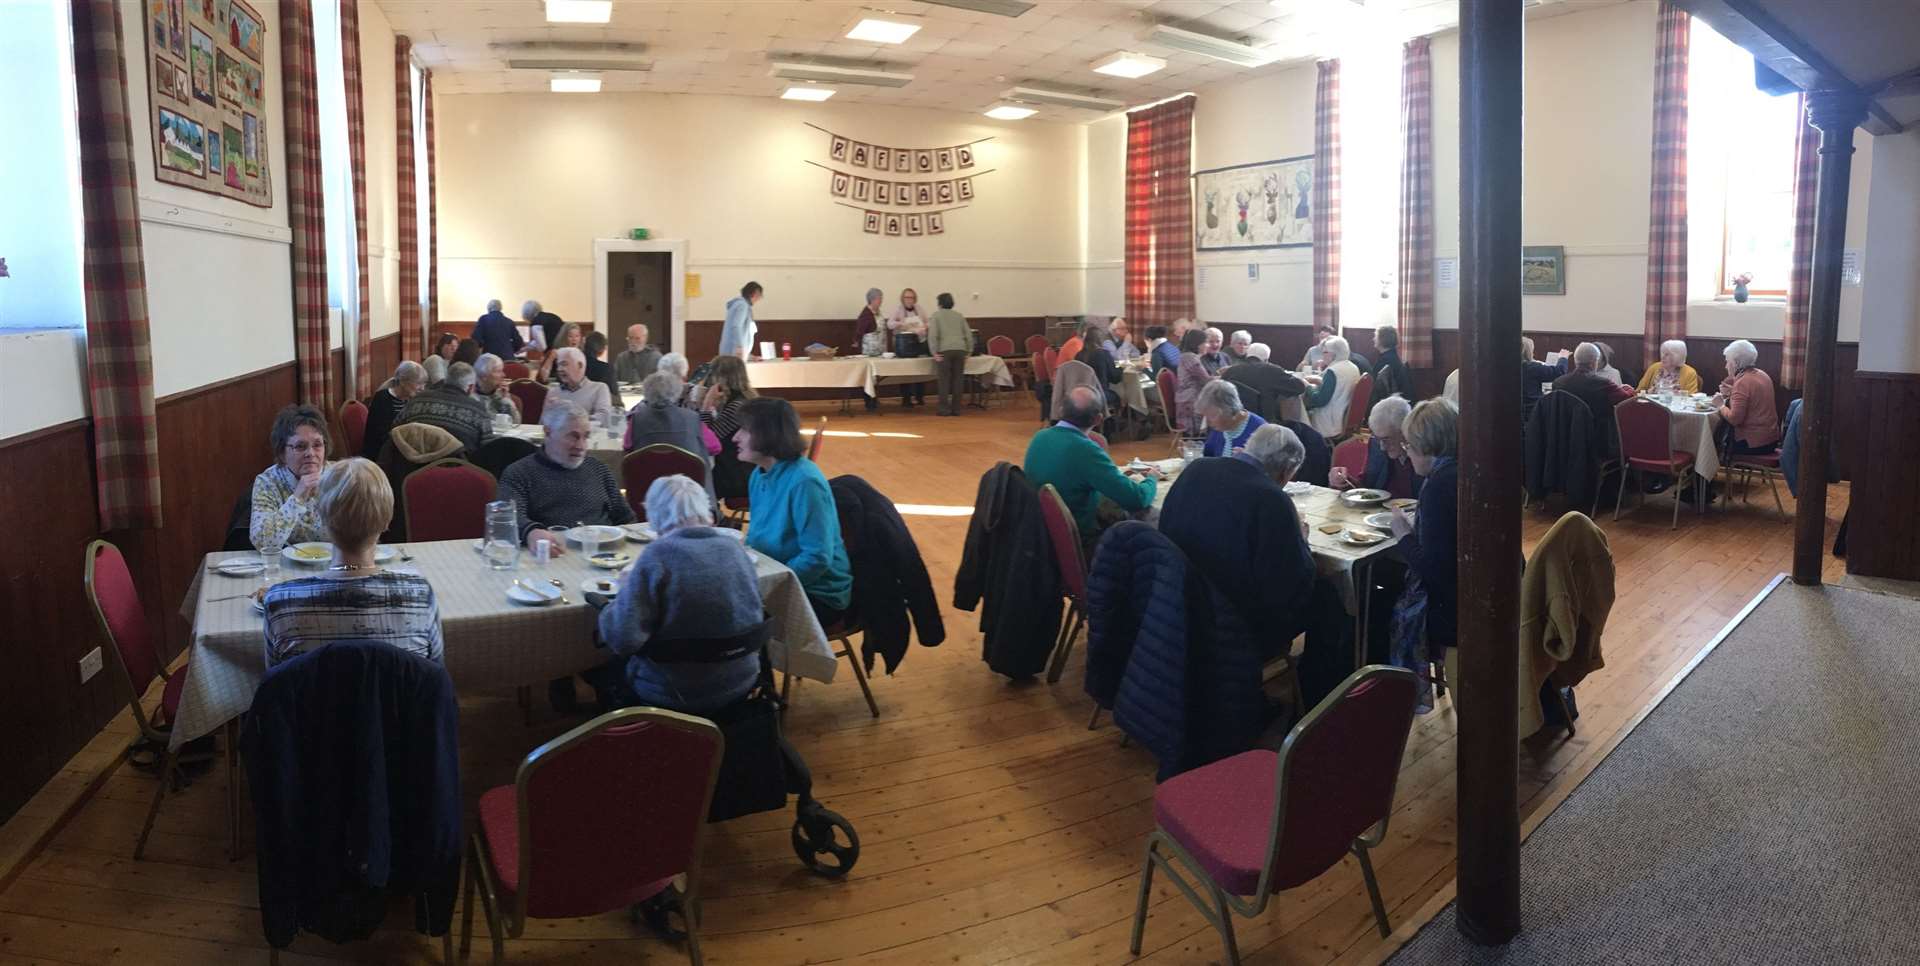 Rafford Village Hall is offering a warm welcome and lunch to its community every Thursday until the end of March.